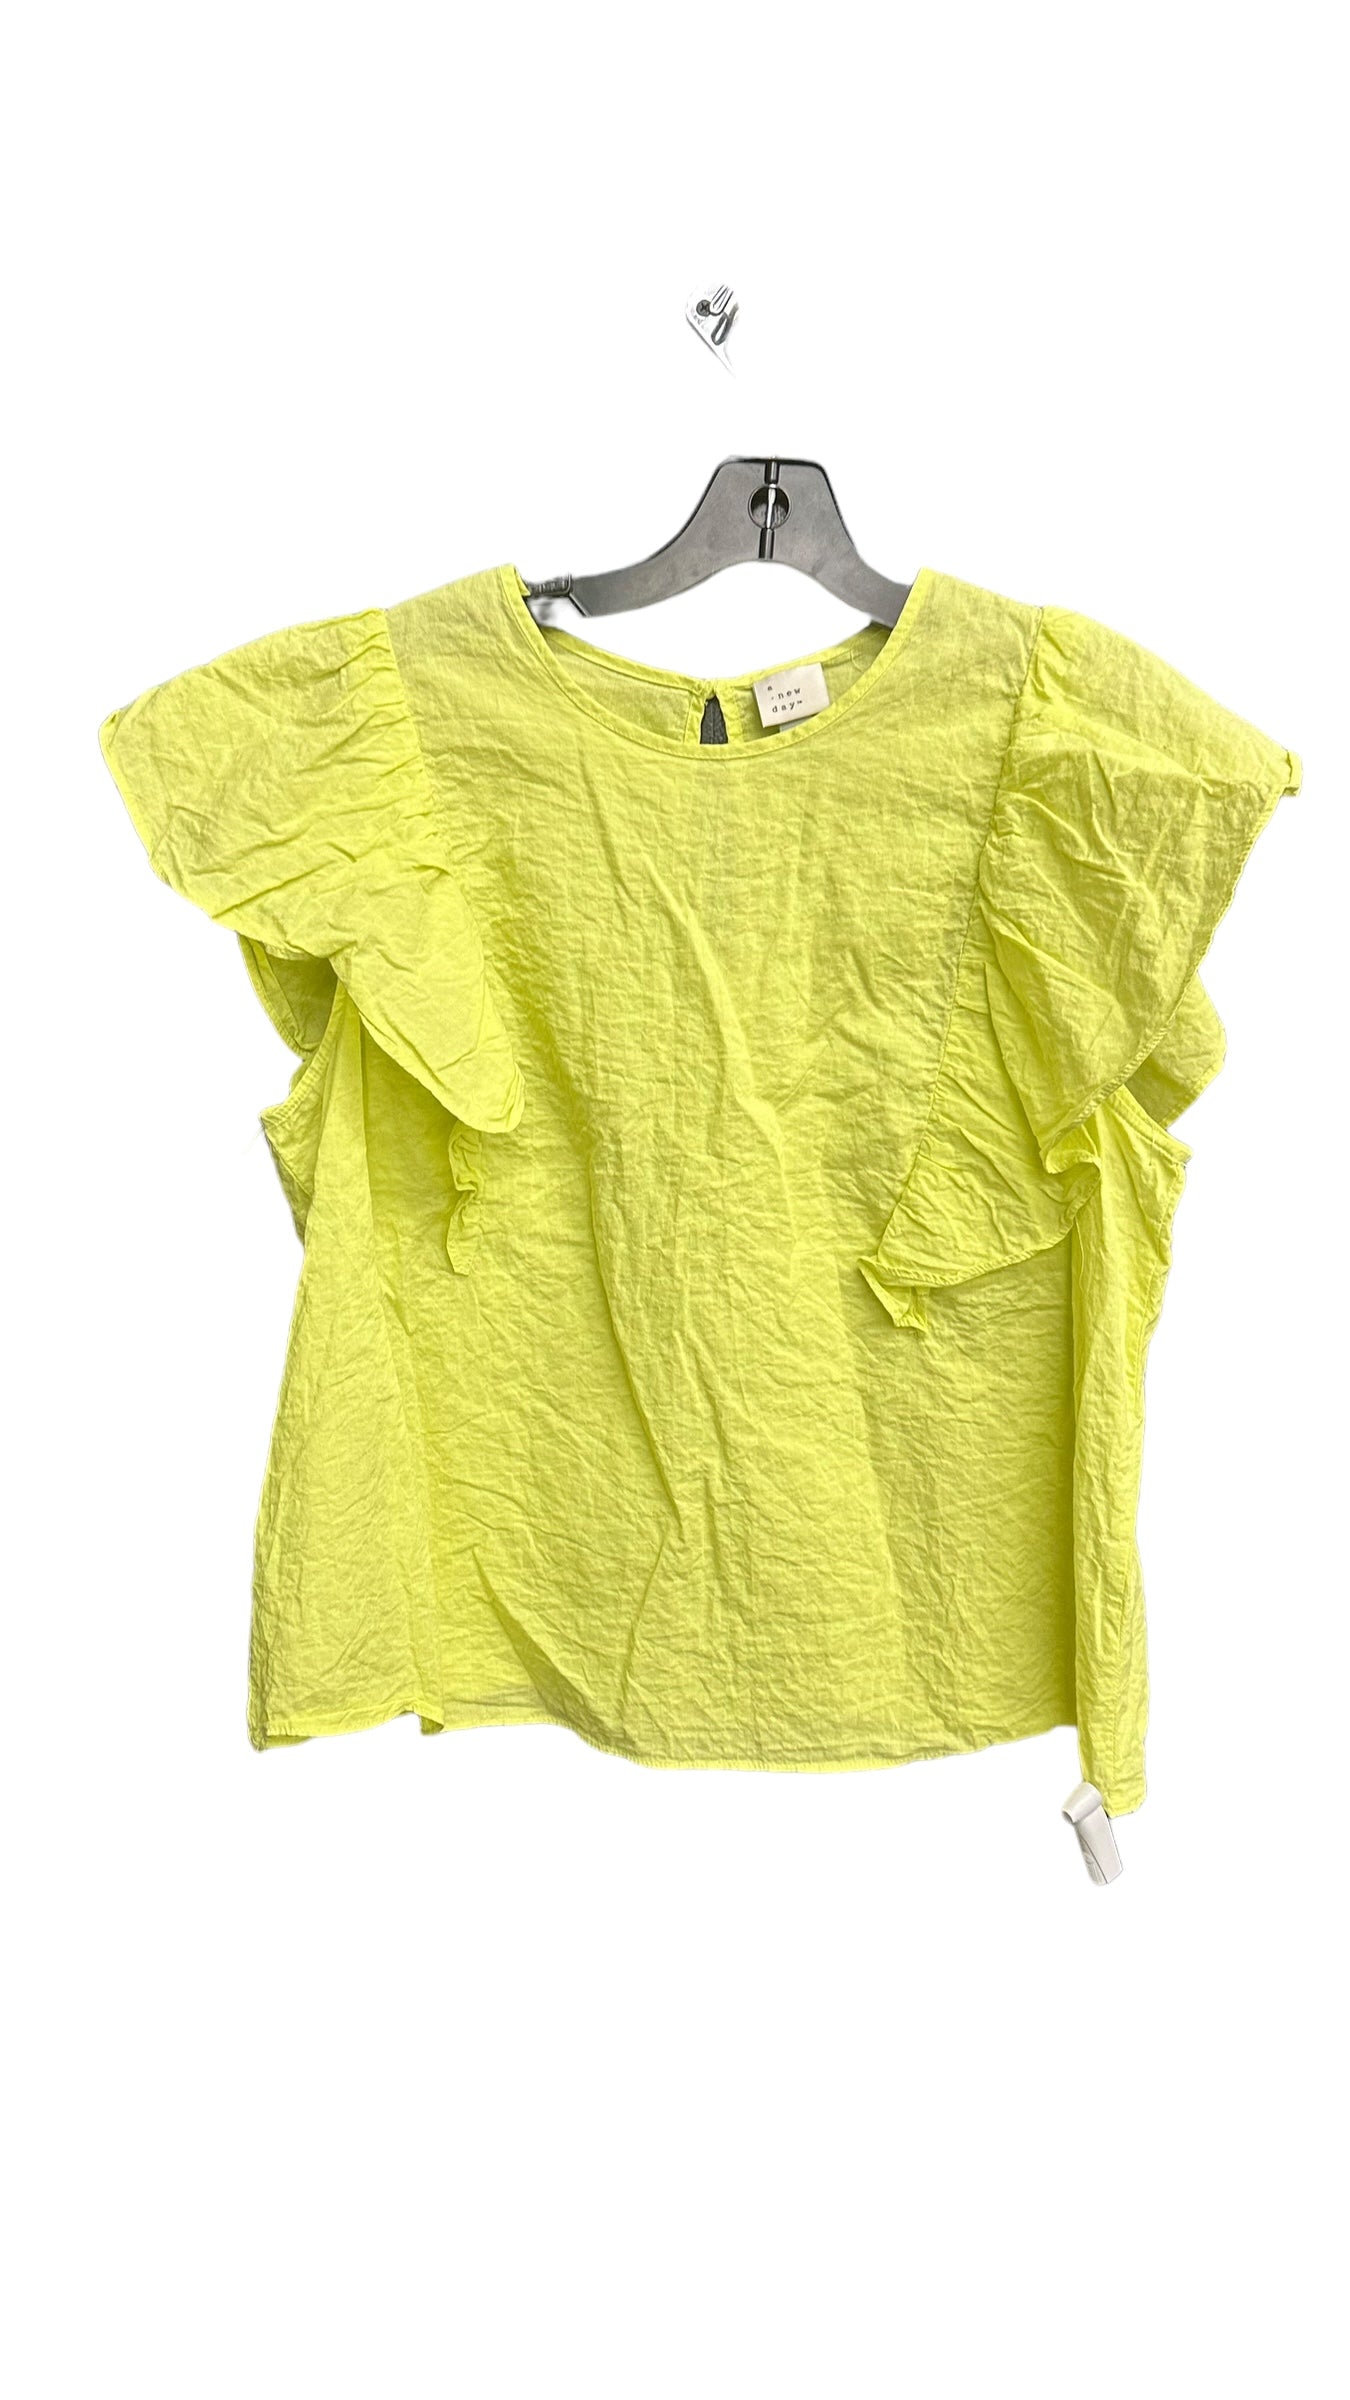 Yellow Top Short Sleeve A New Day, Size Xl